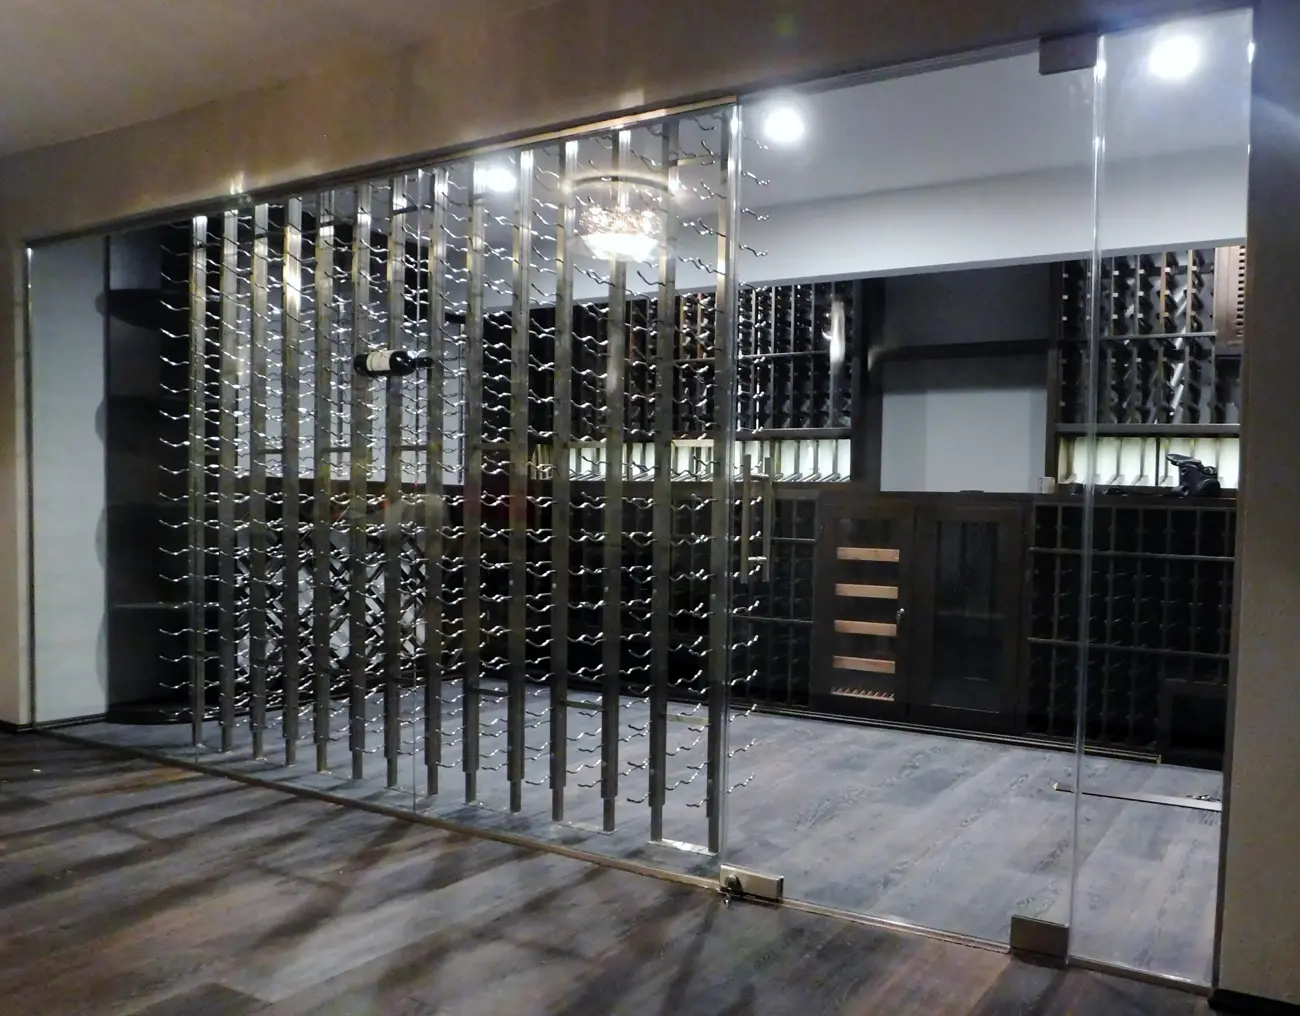 This design idea is now a 2,055 bottle wine cellar tasting and cigar room 1300p